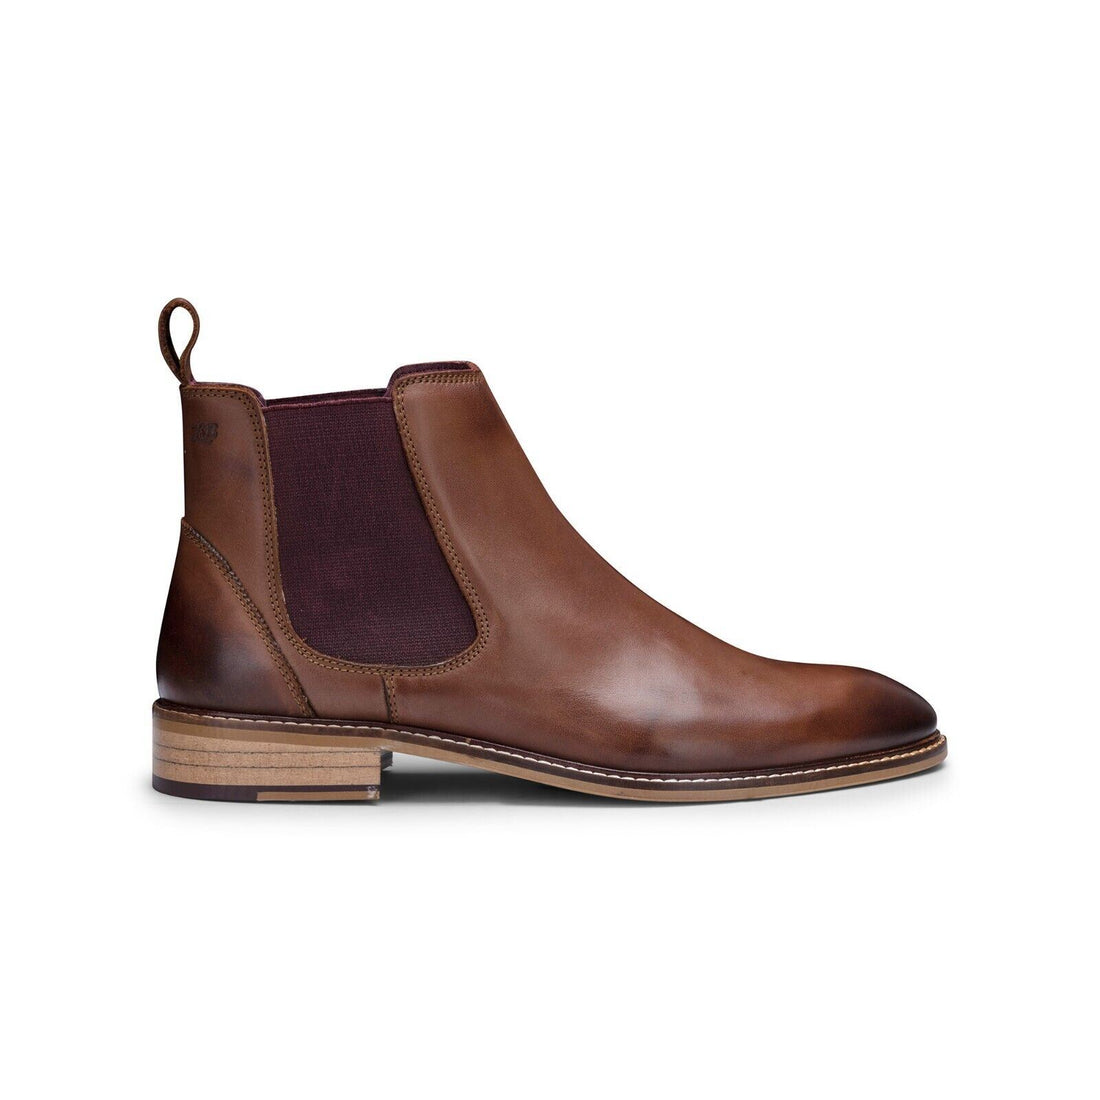 Mens Chestnut-Brown Leather Classic Chelsea Boots - Upperclass Fashions 